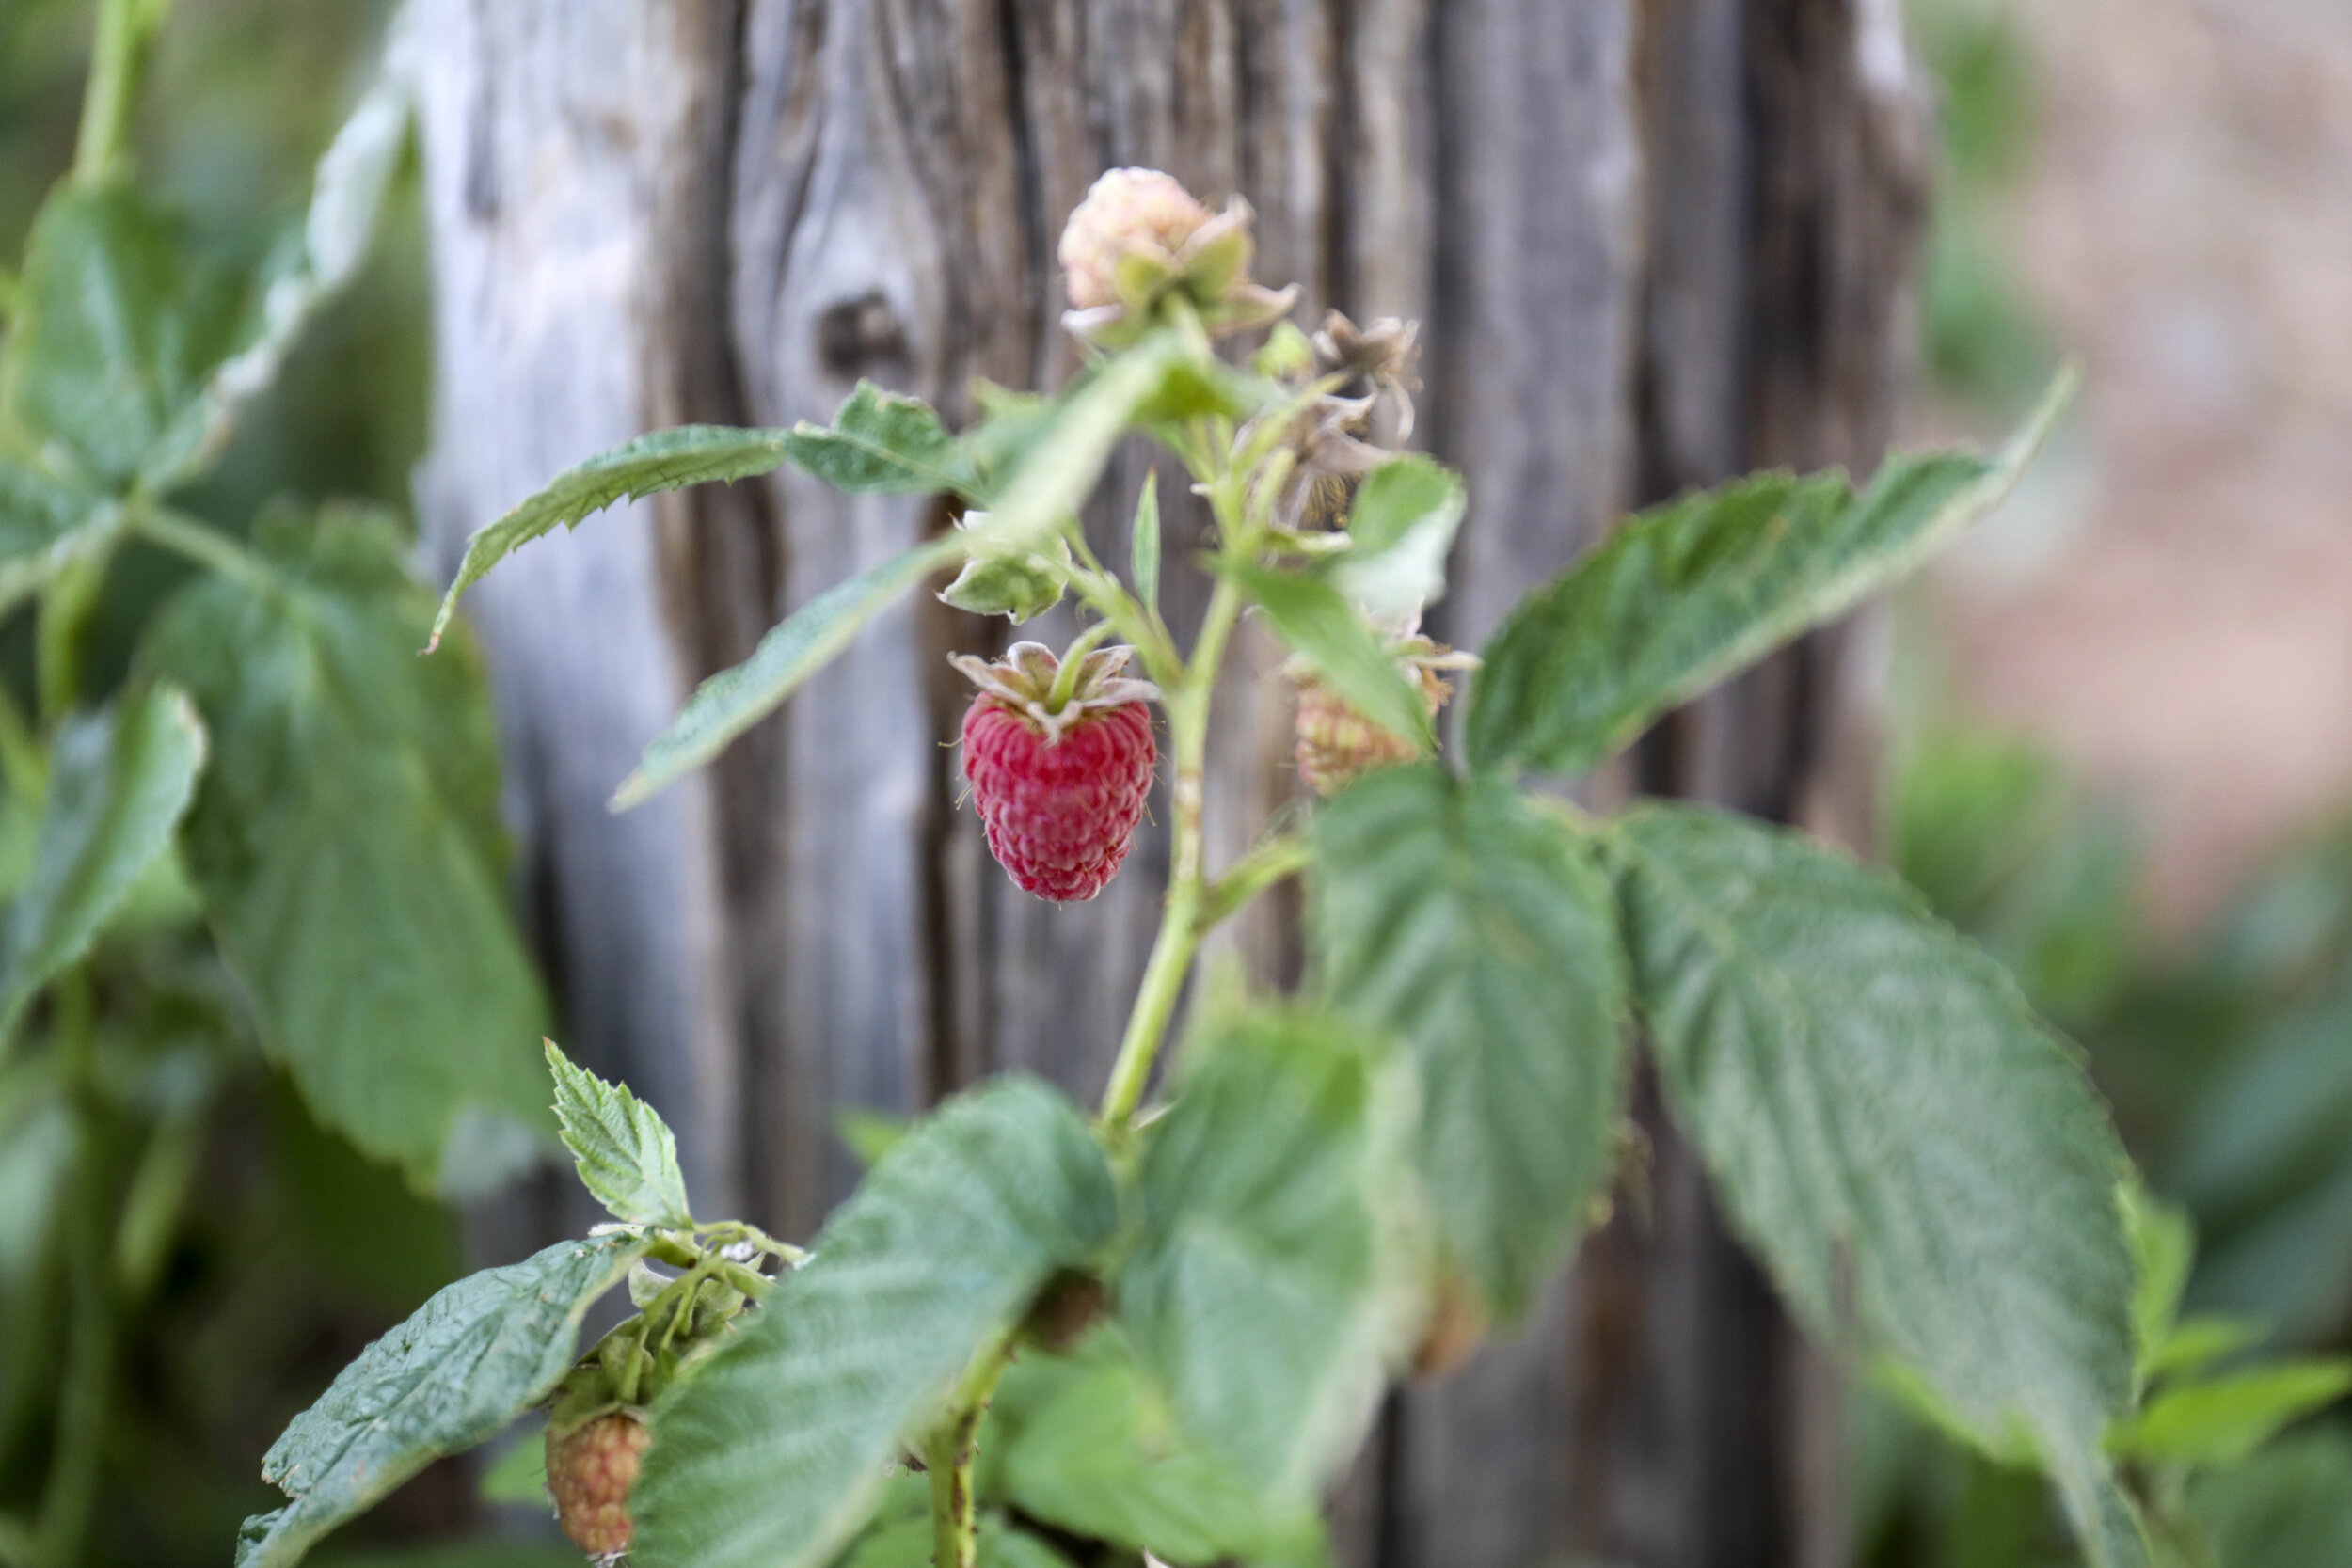  A raspberry awaits picking at the farm. Raspberries are one of the many crops the Schwebach’s grow. 